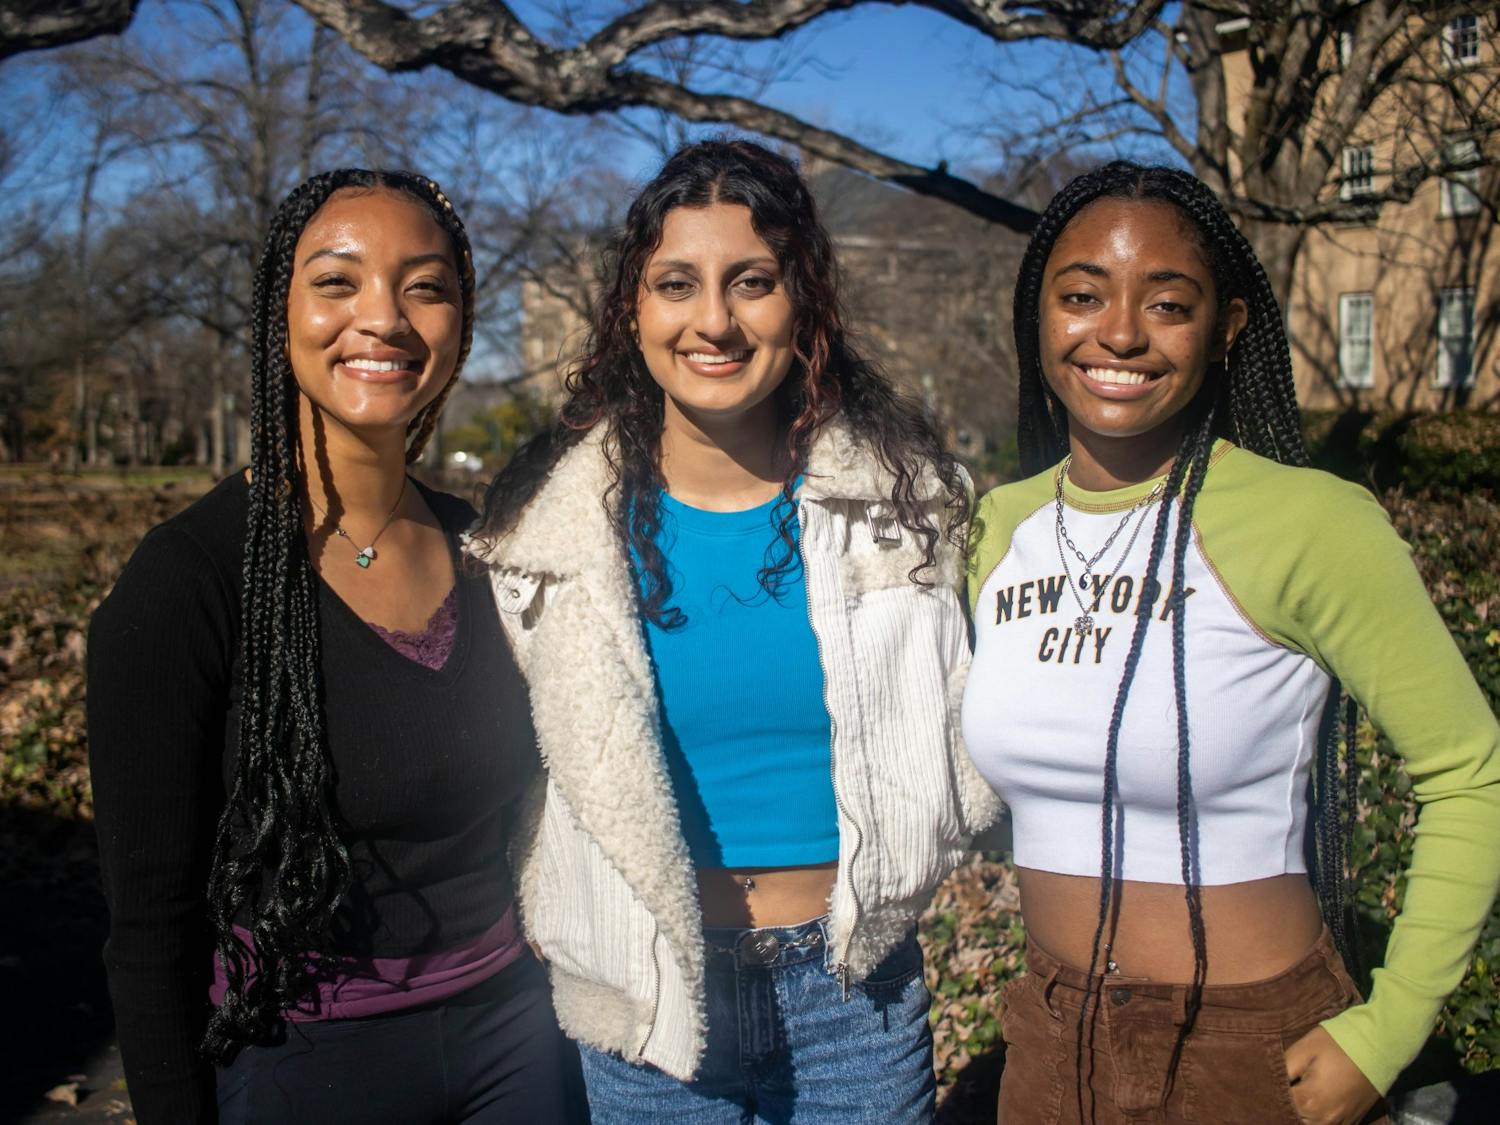 UNC seniors Shelby Armstrong, Avni Singh and Nyla Guilford, pictured on Tuesday, Jan. 24, 2023, are three members of the large production team for the student film "Sticky Feet."